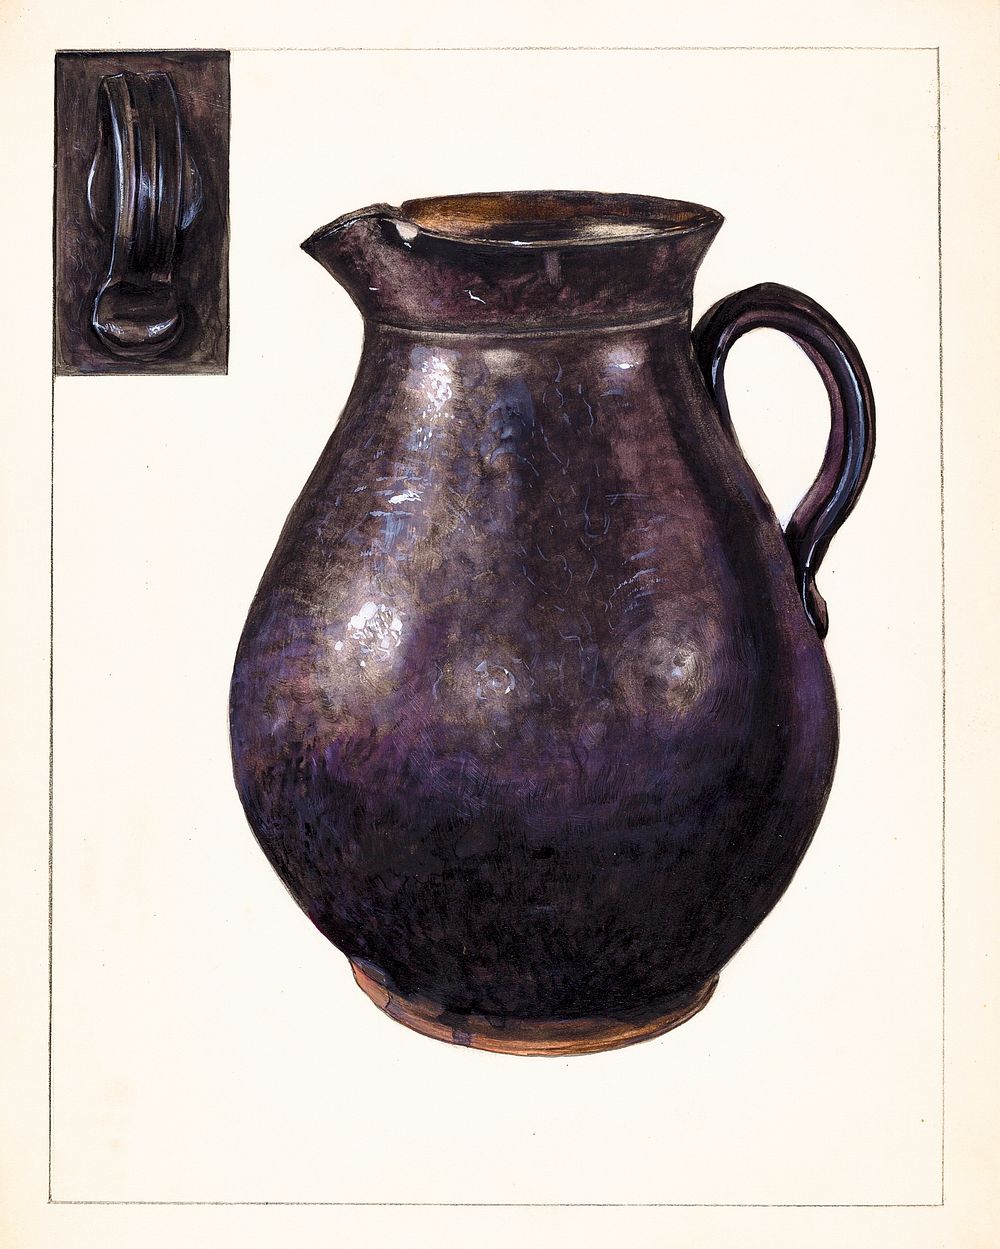 Pitcher (ca. 1936) by Mina Lowry. Original from The National Gallery of Art. Digitally enhanced by rawpixel.